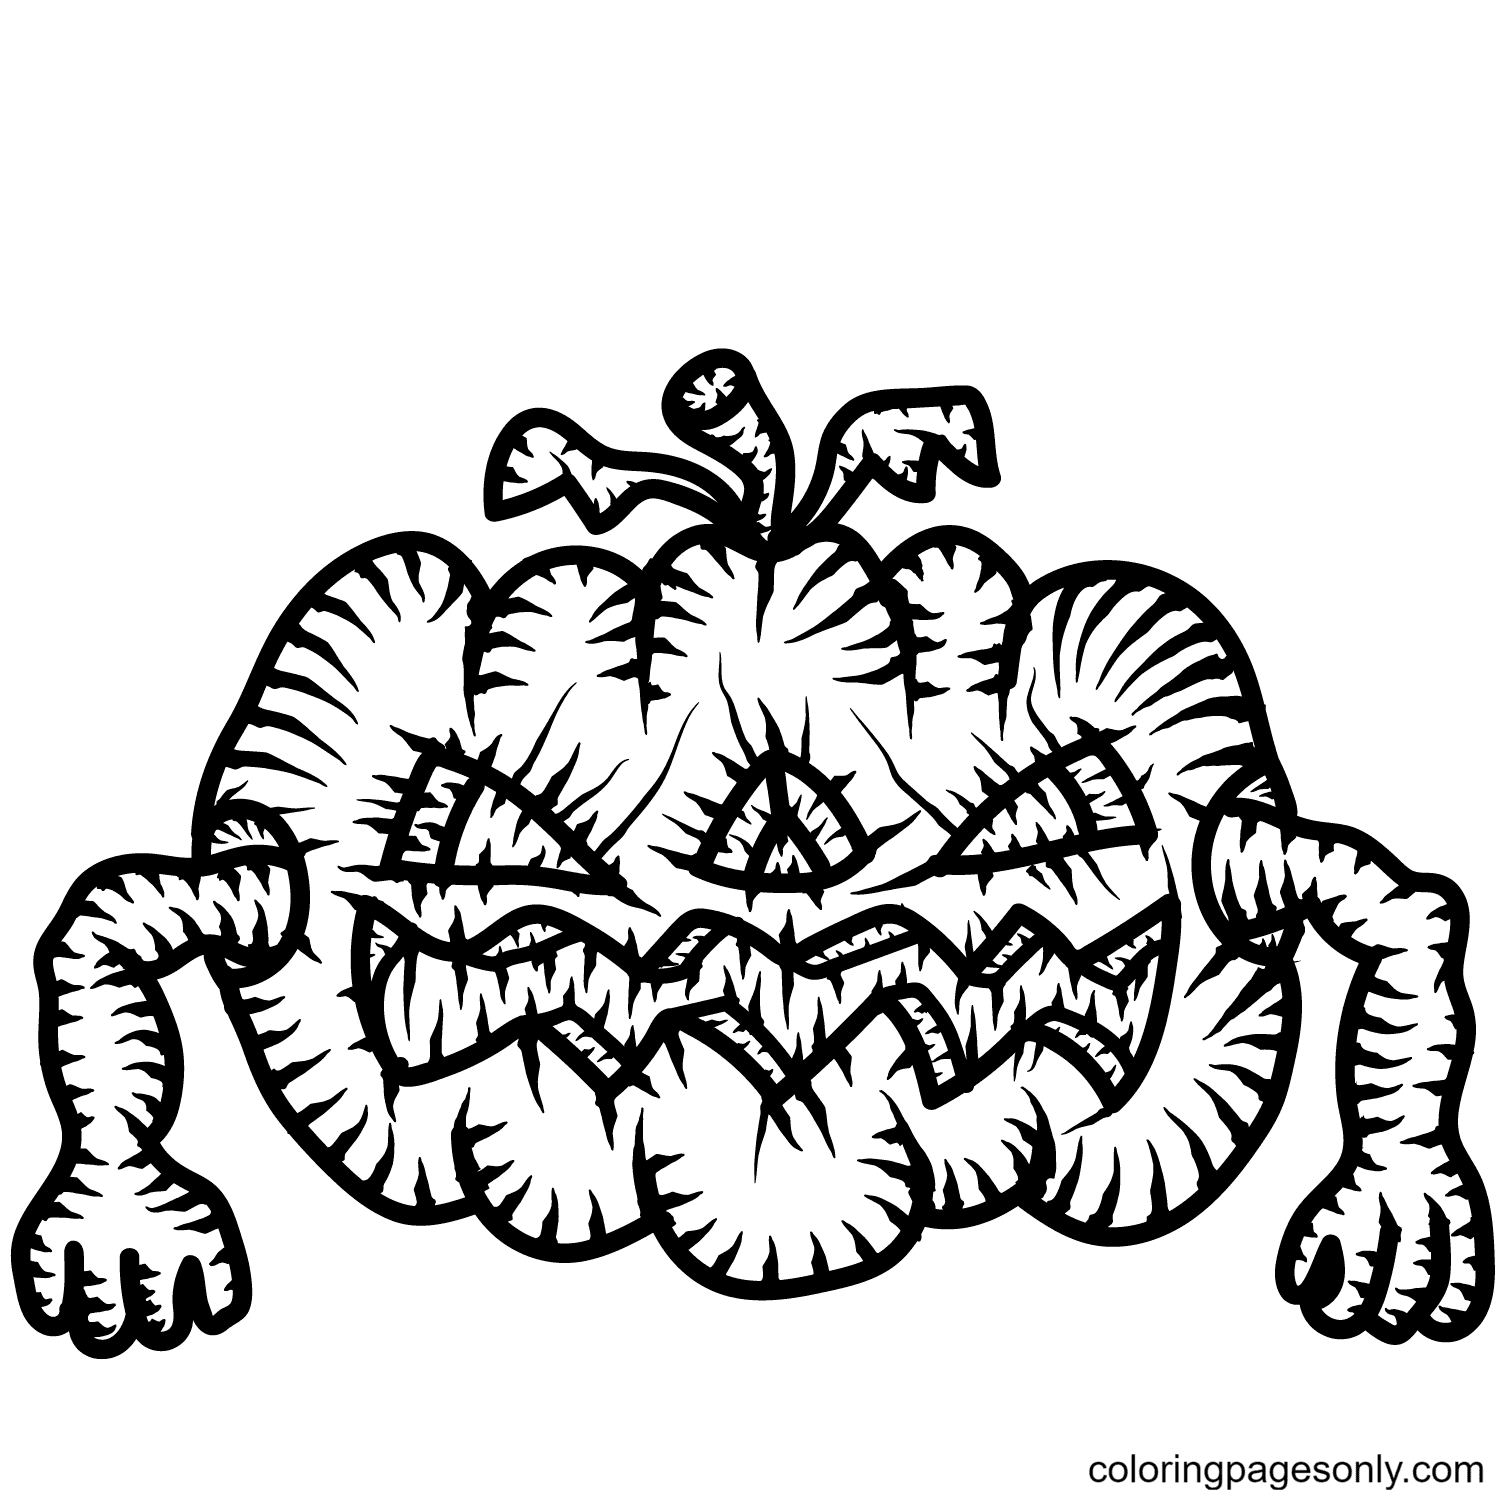 Scary Jack-o’-Lantern Coloring Pages